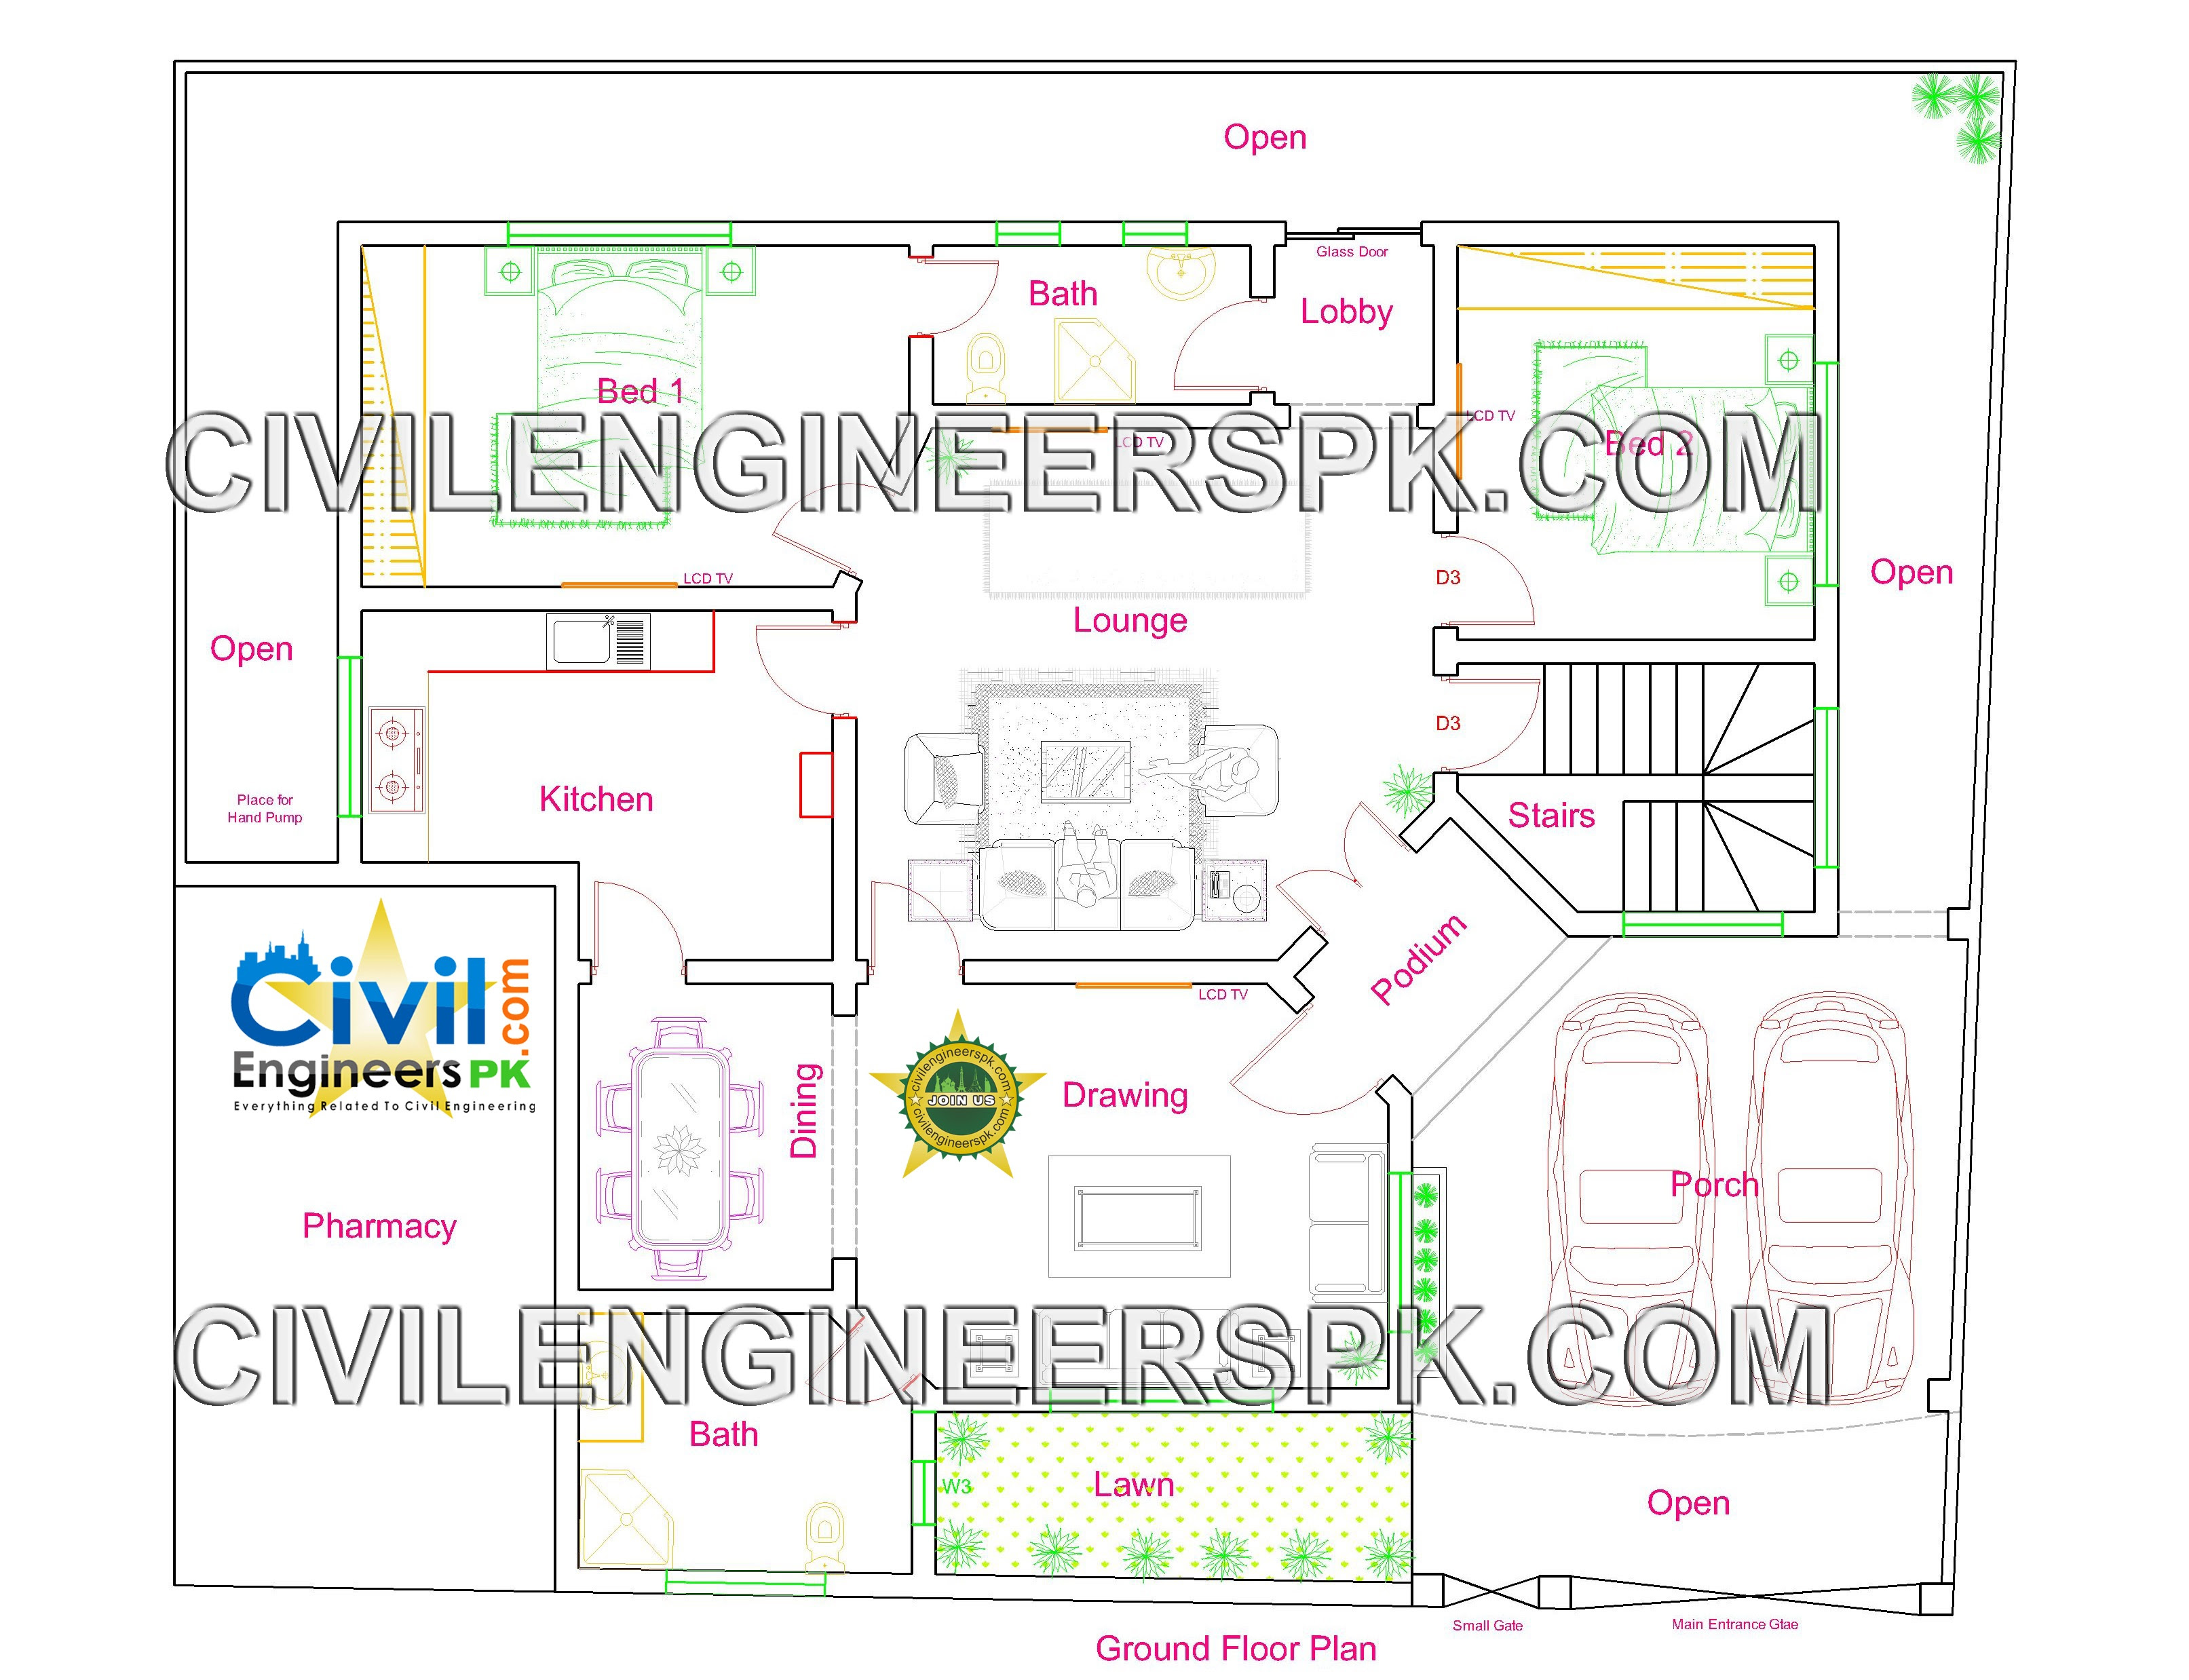 53+ Famous 10 Marla House Plan Autocad File Free Download